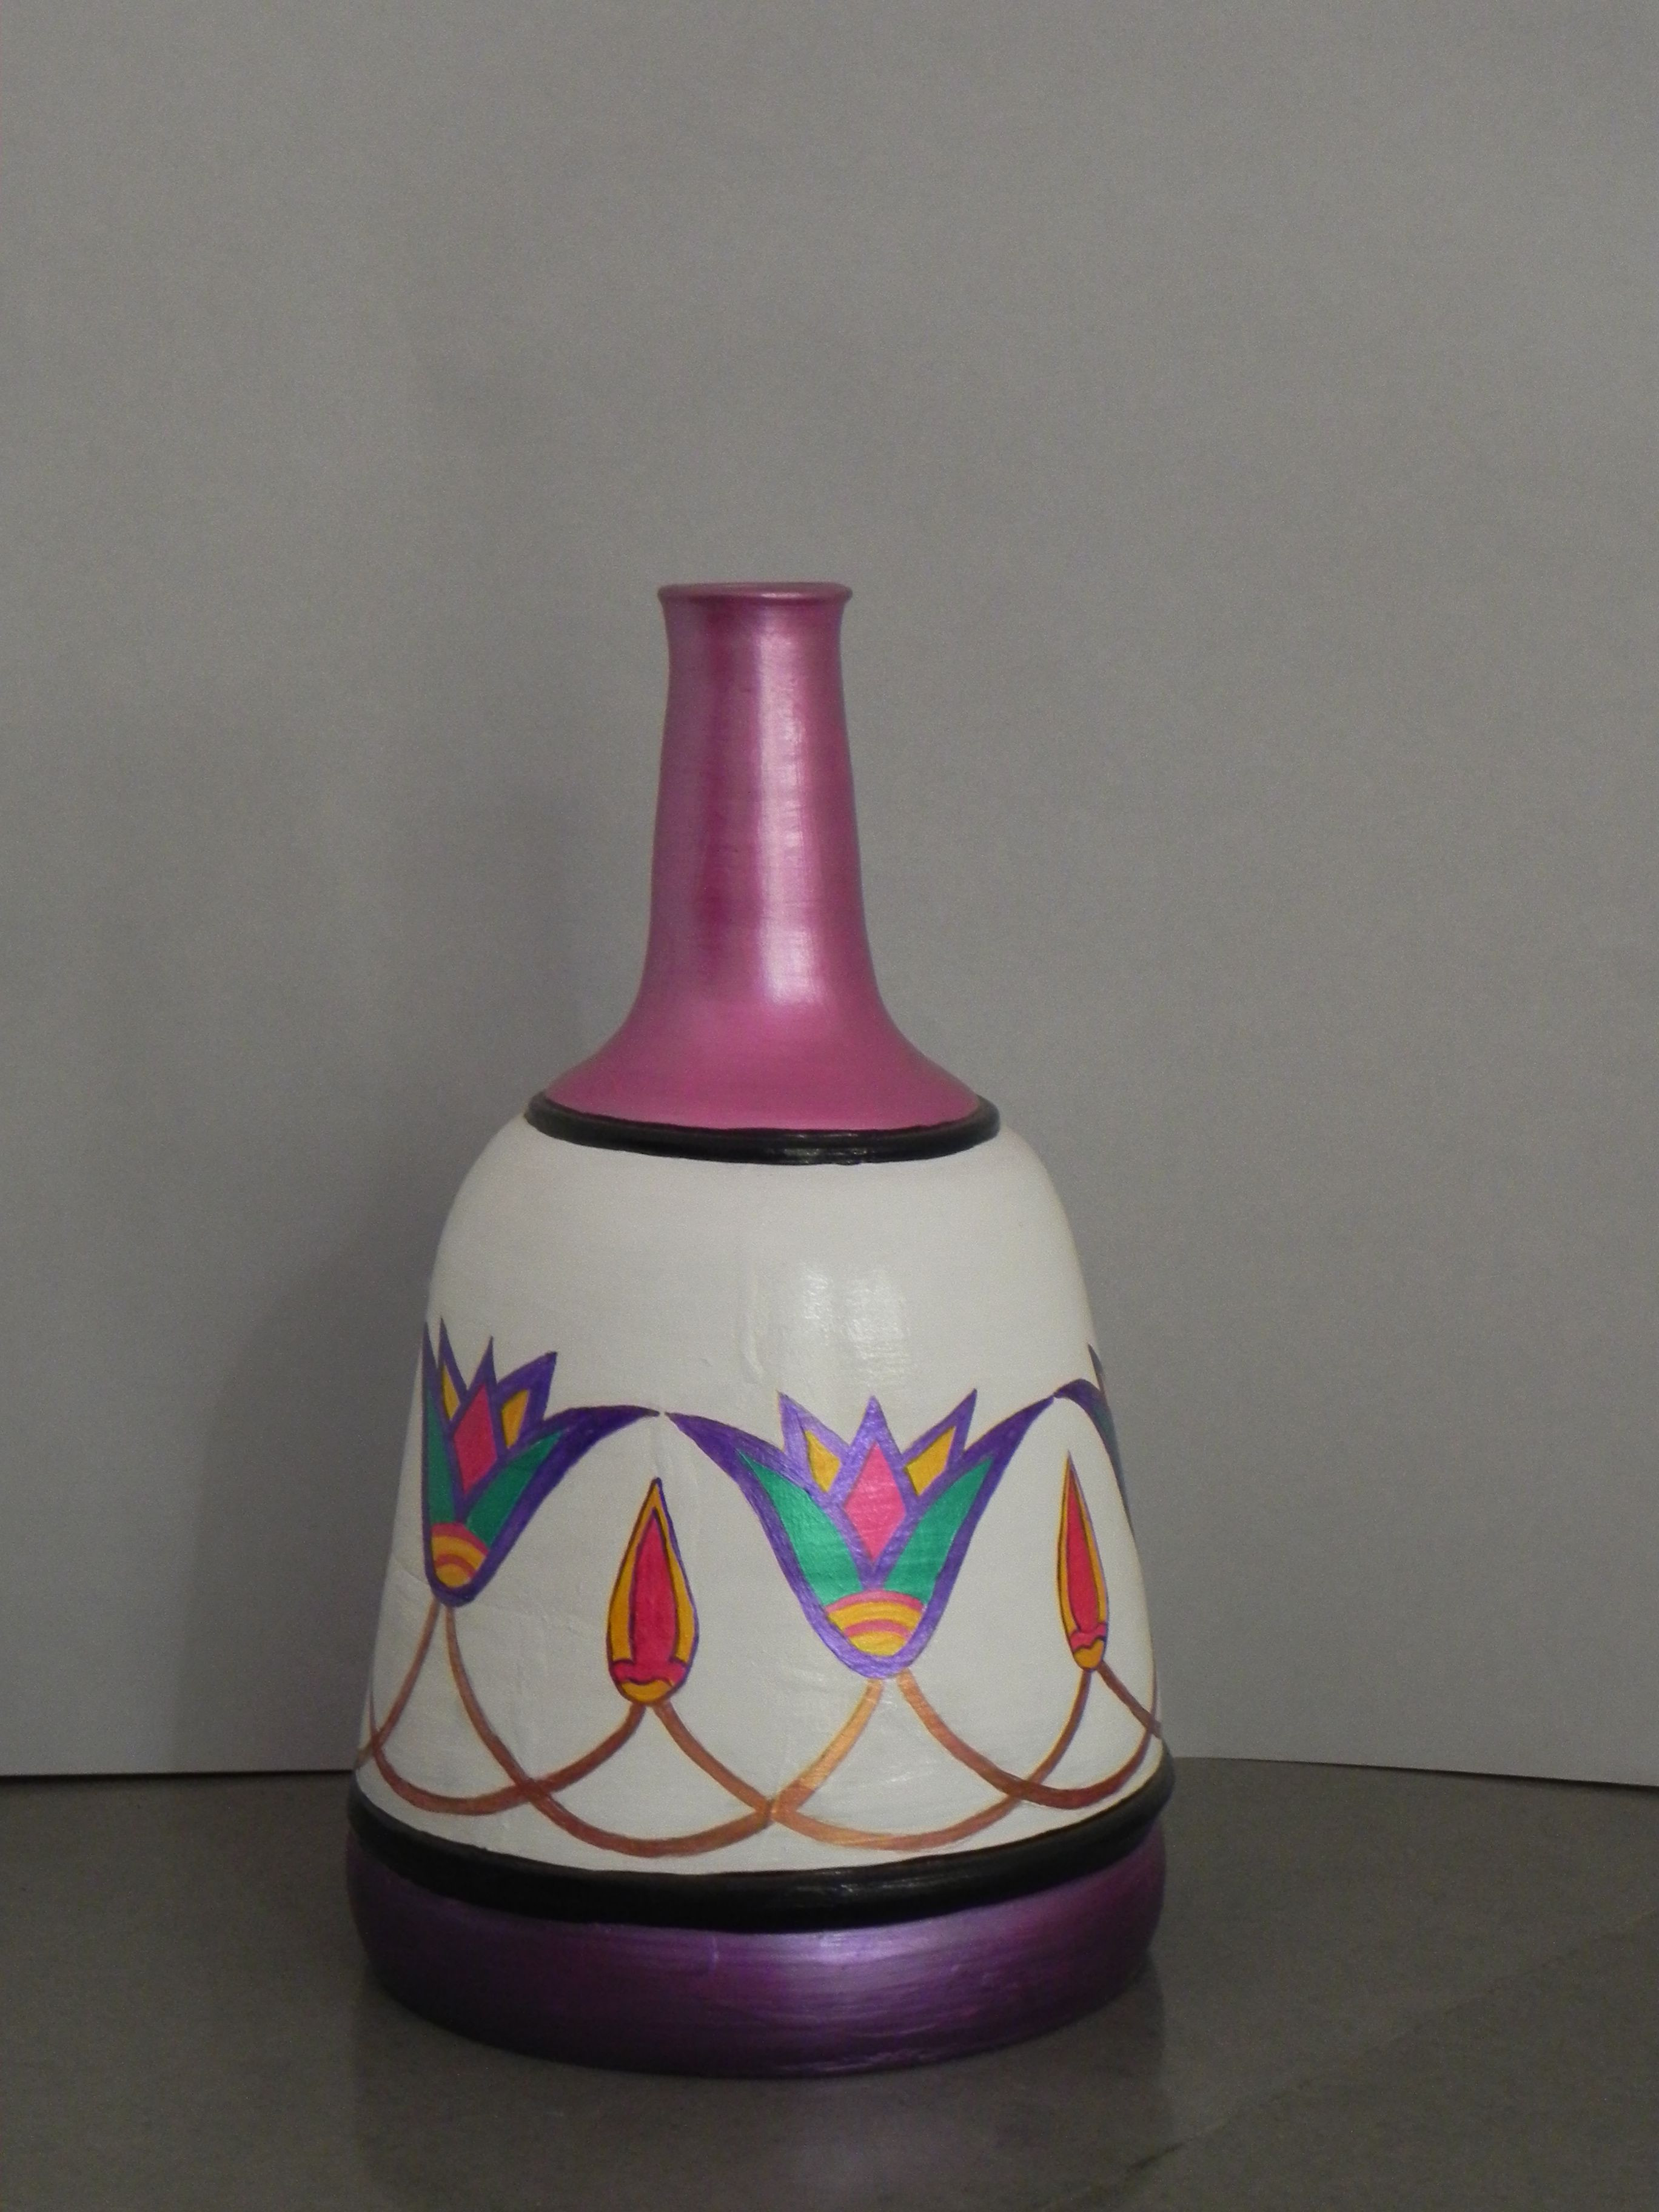 20 Nice Flower Vase Stand Online 2024 free download flower vase stand online of egyptian style pot floral design in egyptian style white background within egyptian style pot floral design in egyptian style white background pink neck violet bo